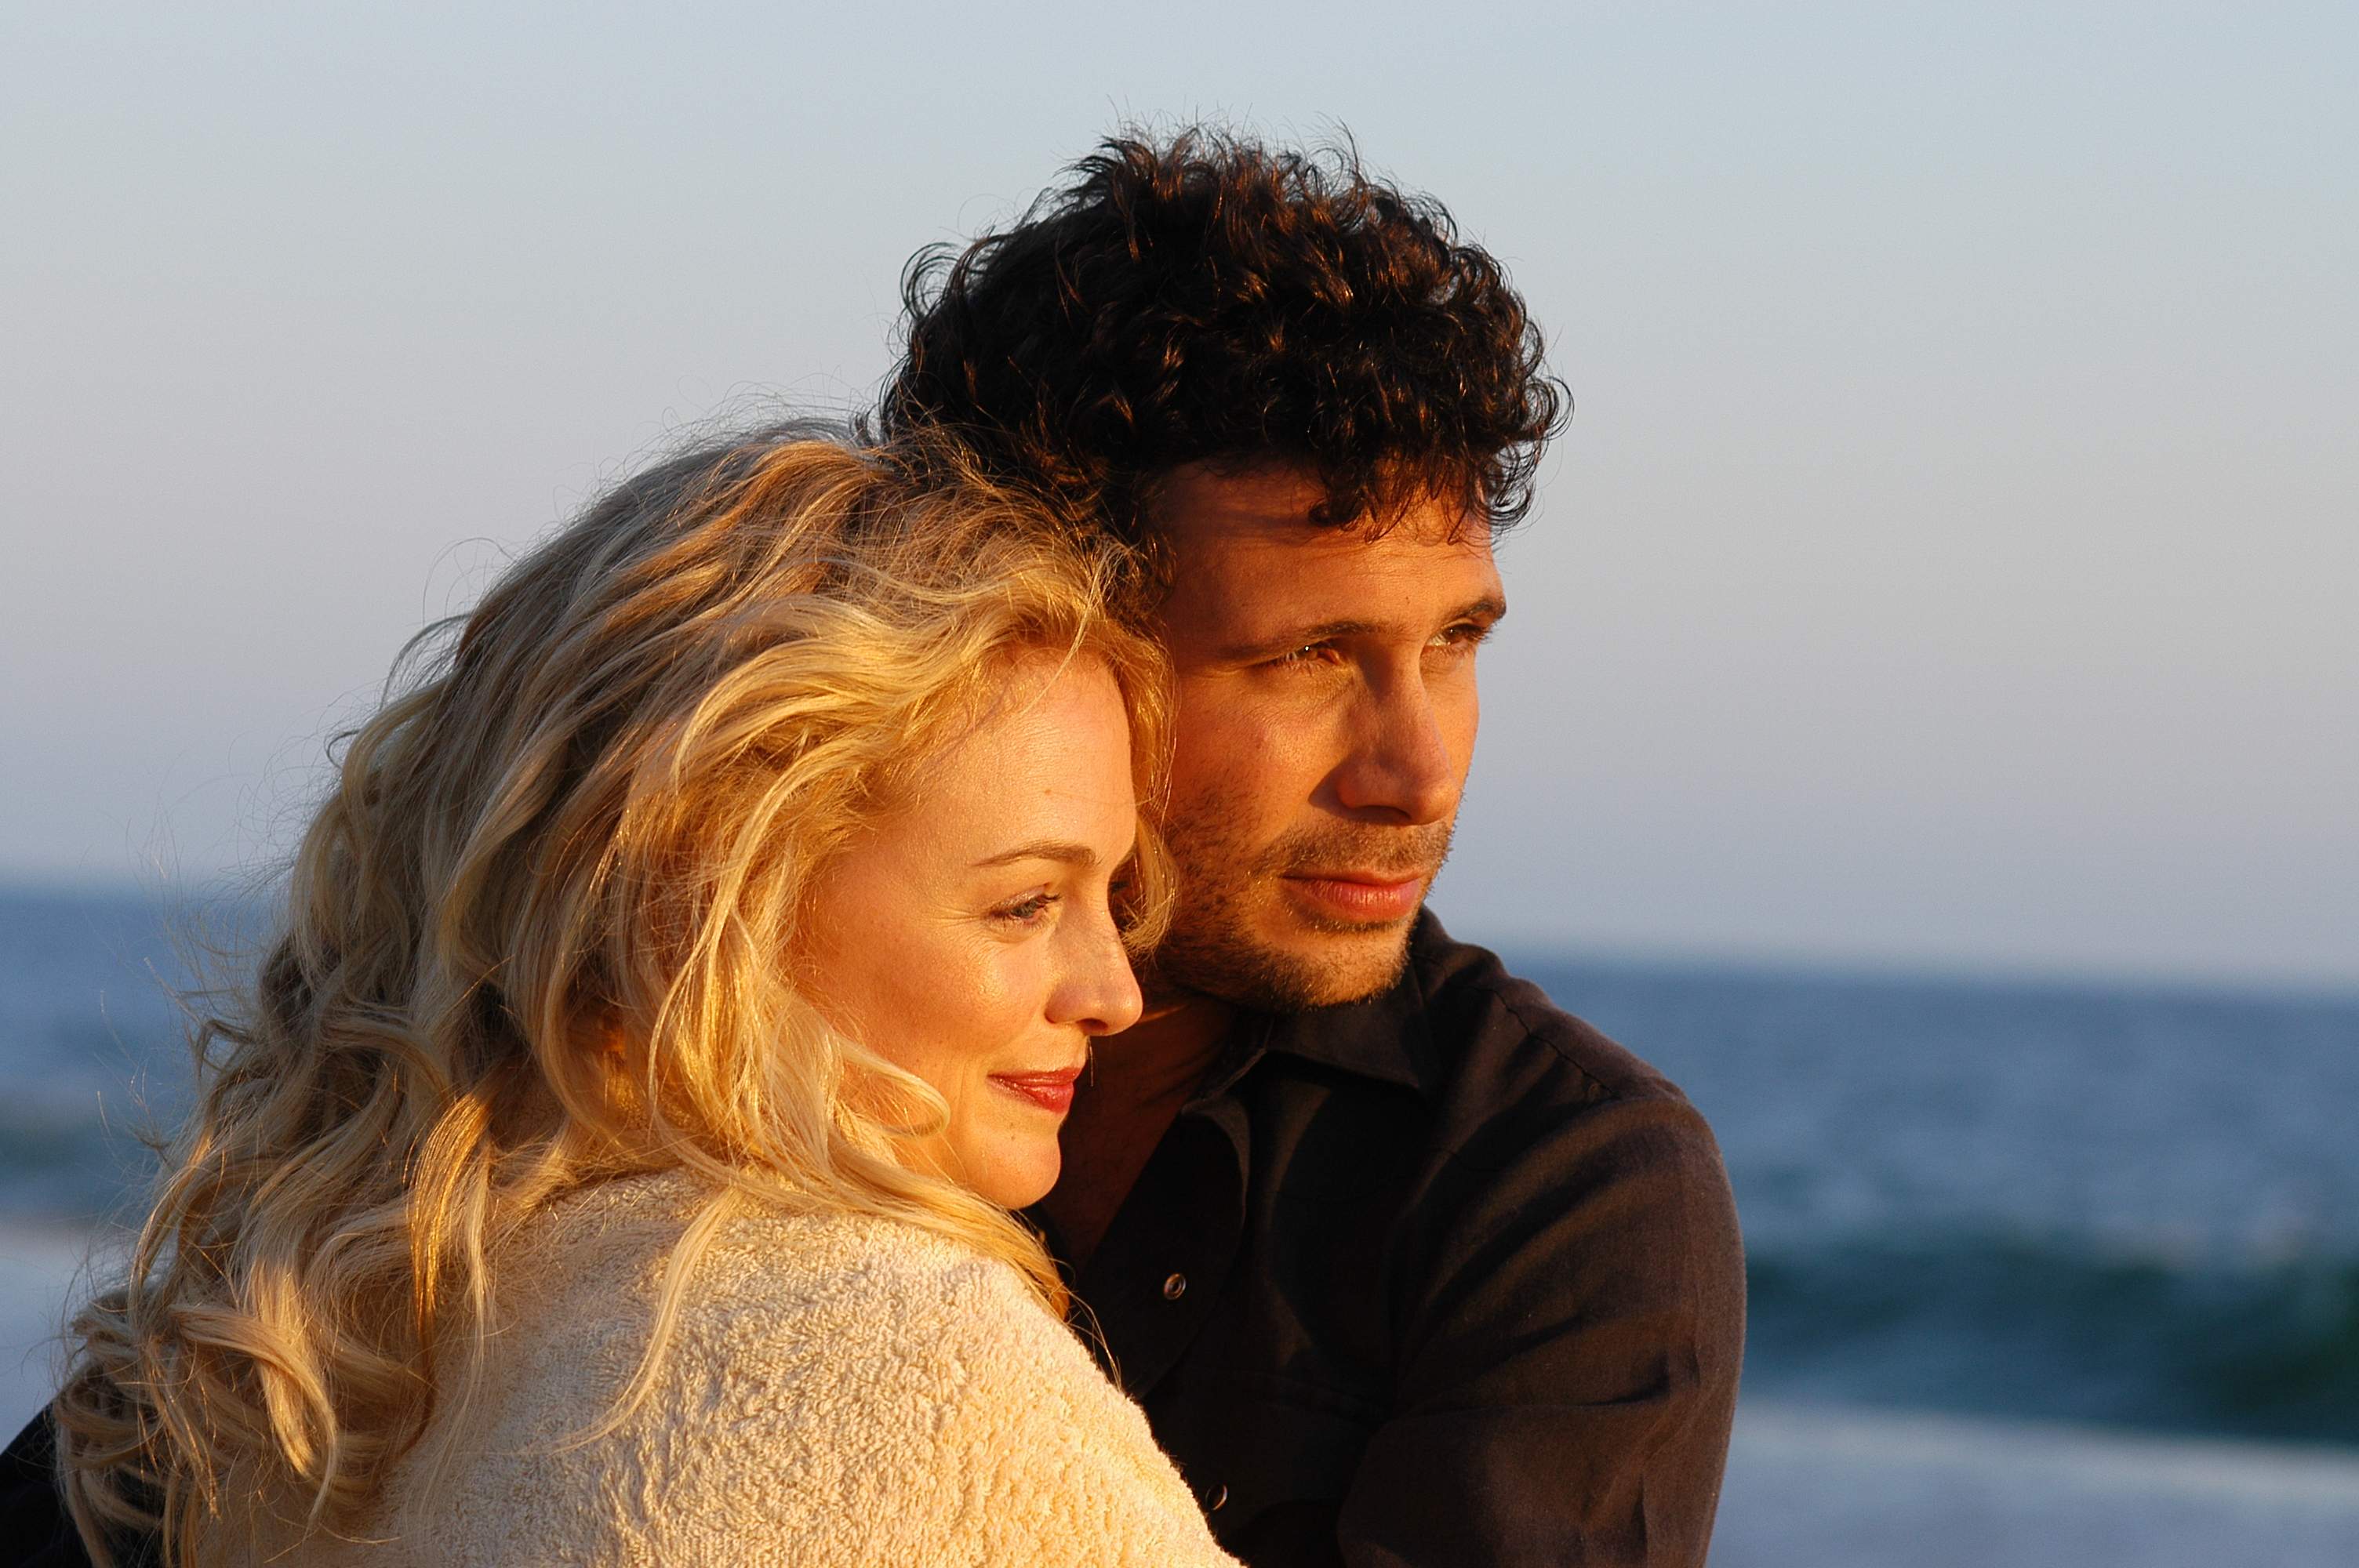 Heather Graham as Hope and Jeremy Sisto as Will in First Look Pictures' Broken (2007)